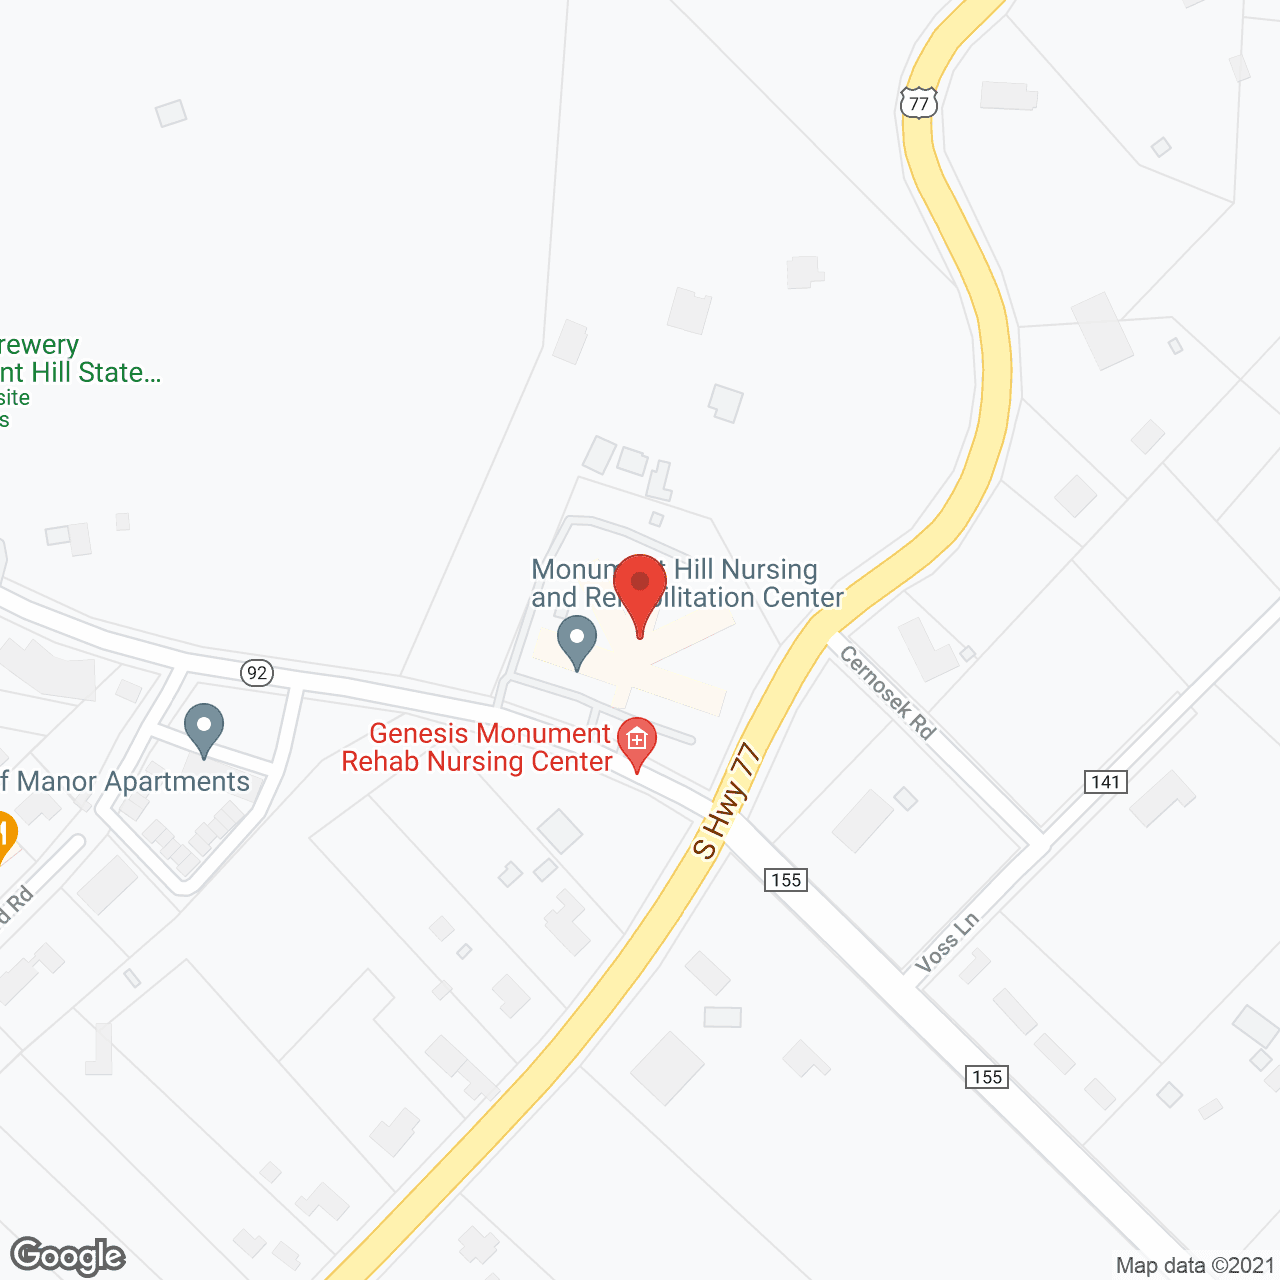 Monument Hill Nursing and Rehab Ctr in google map